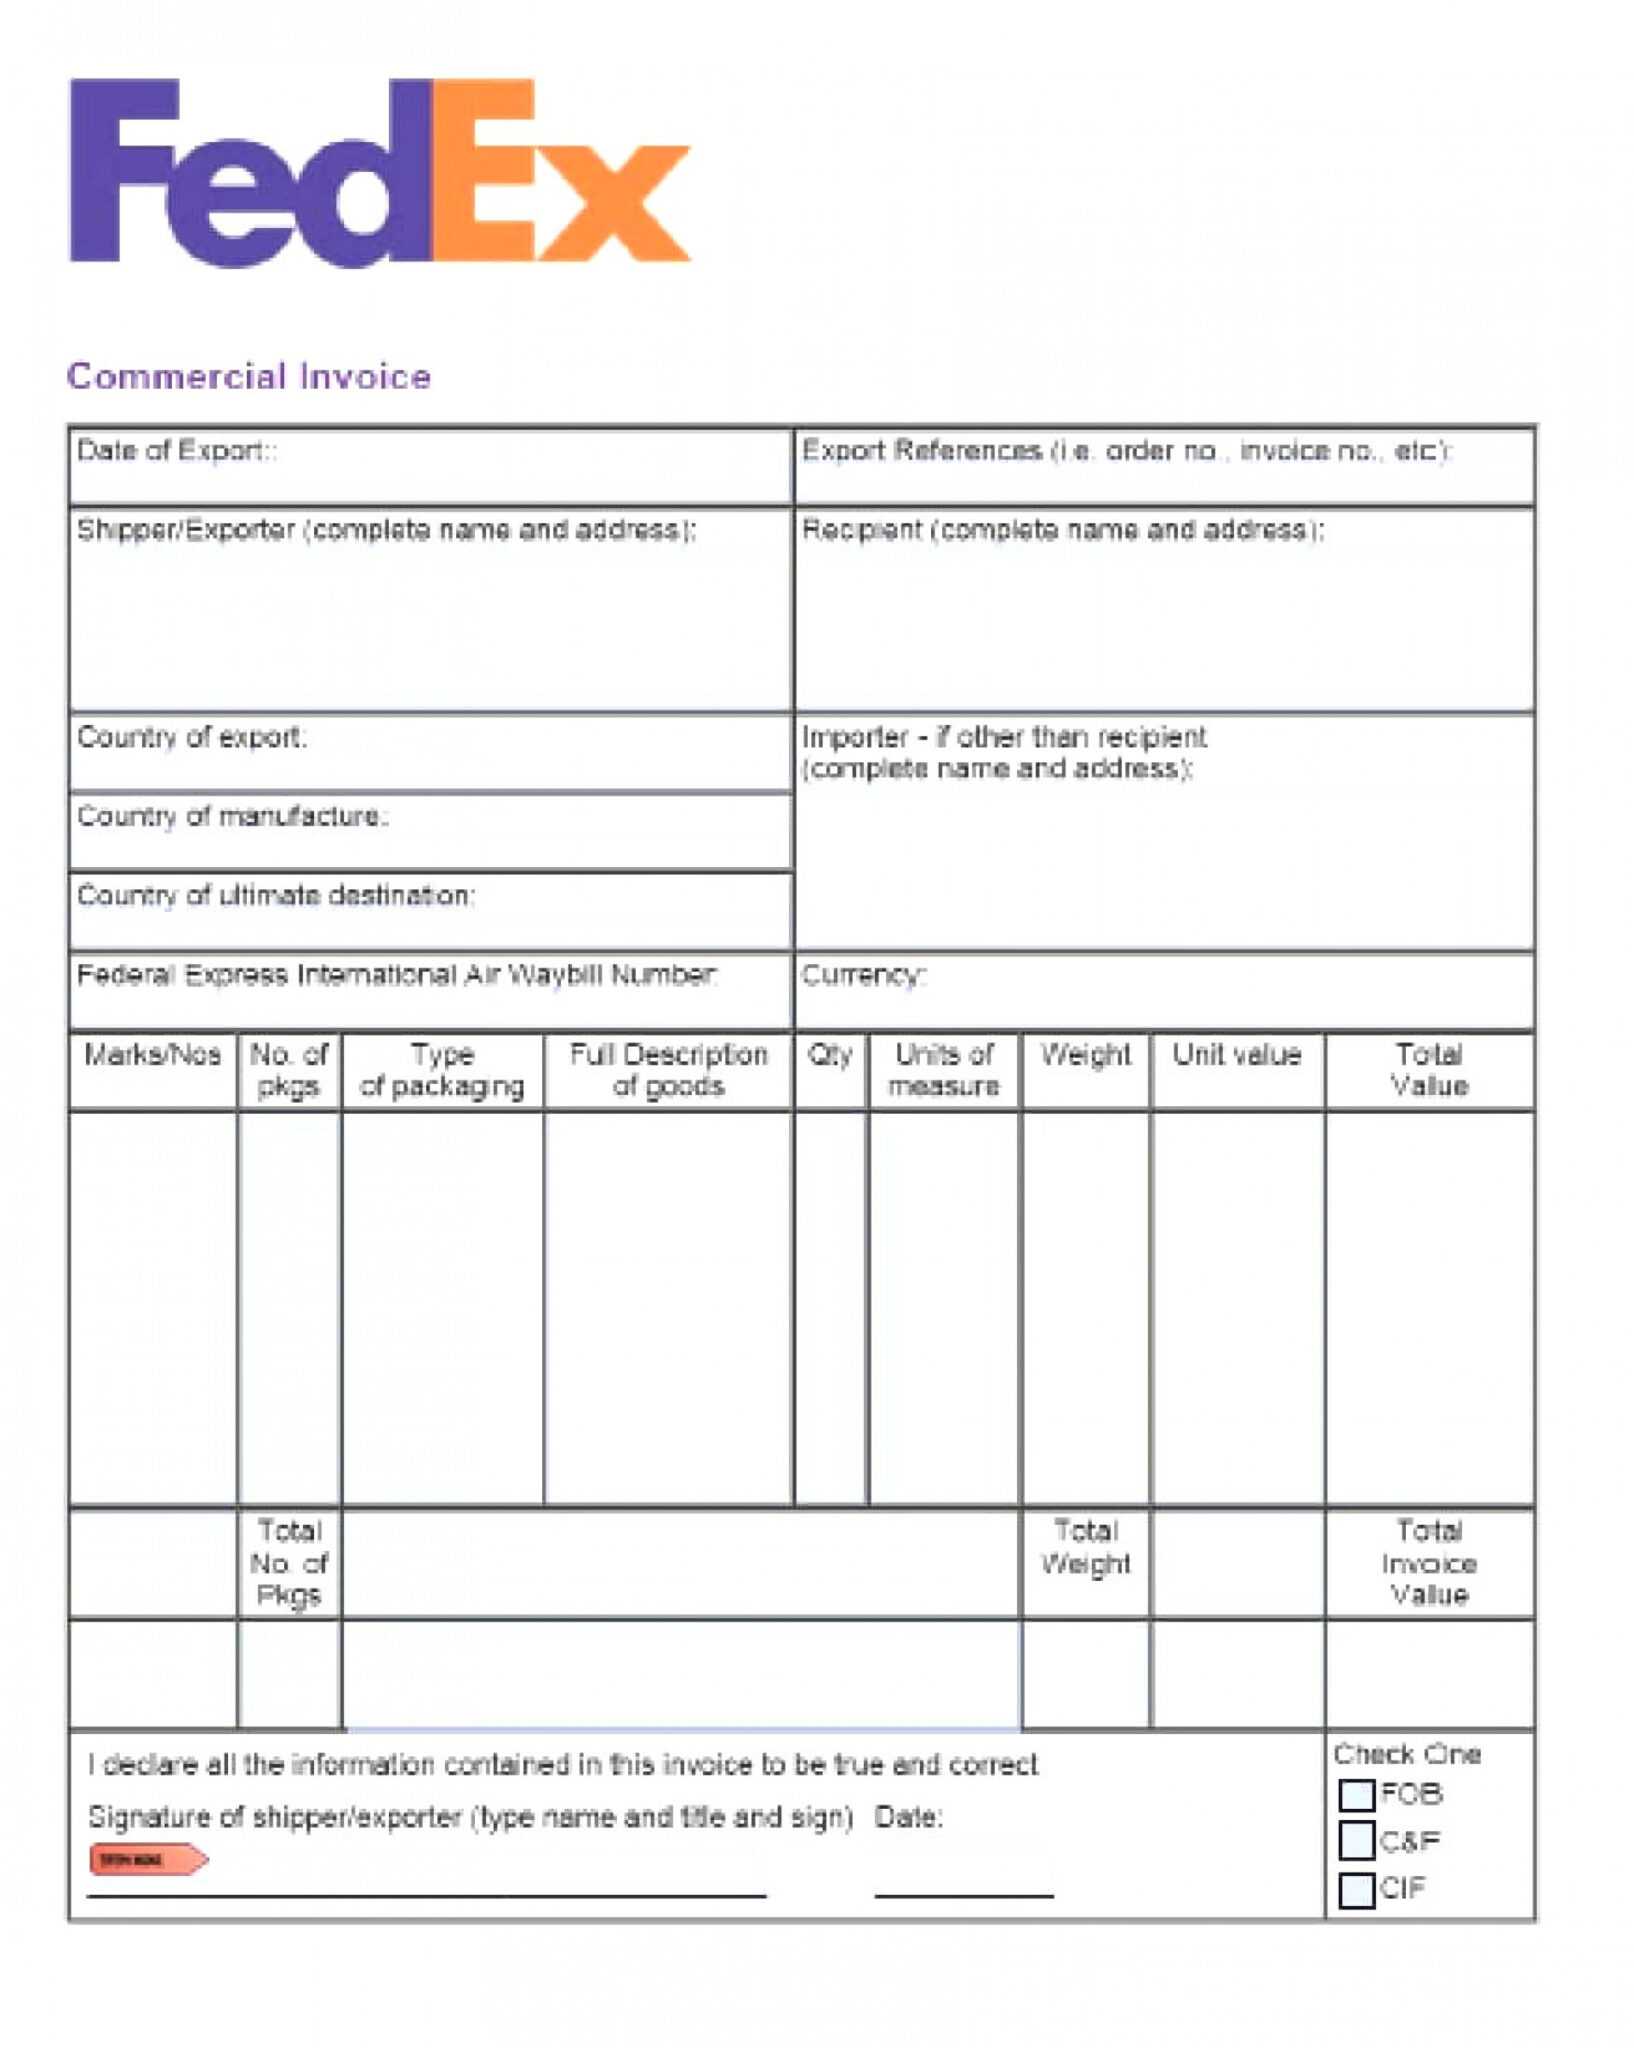 tnt commercial invoice template